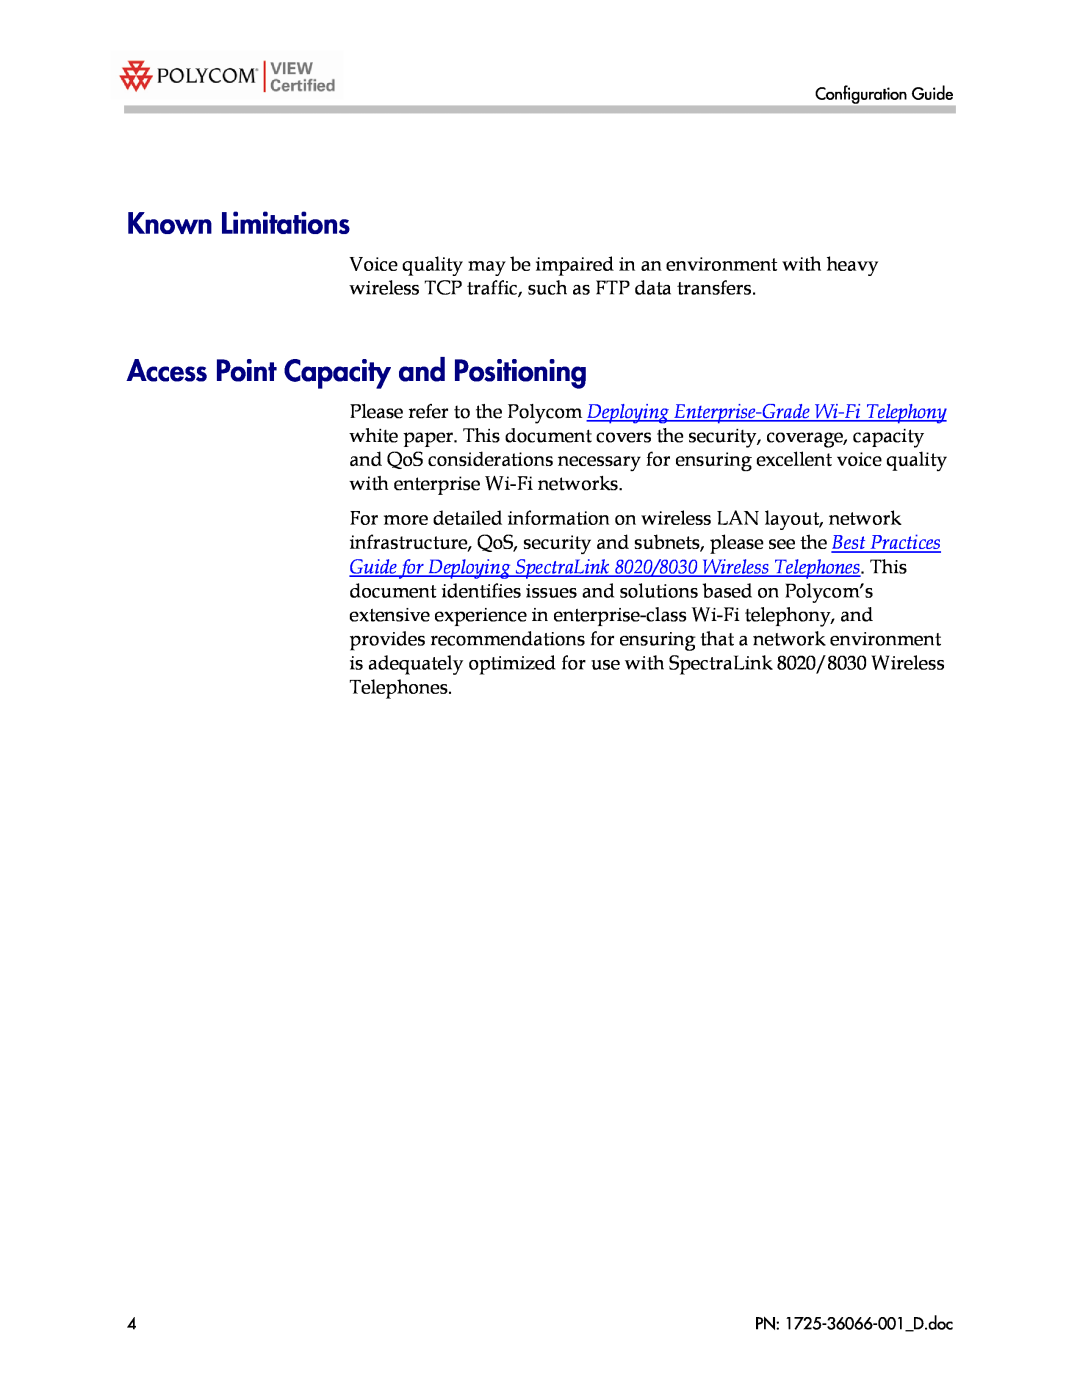 Motorola WS 2000 with AP 300 manual Known Limitations, Access Point Capacity and Positioning, Configuration Guide 